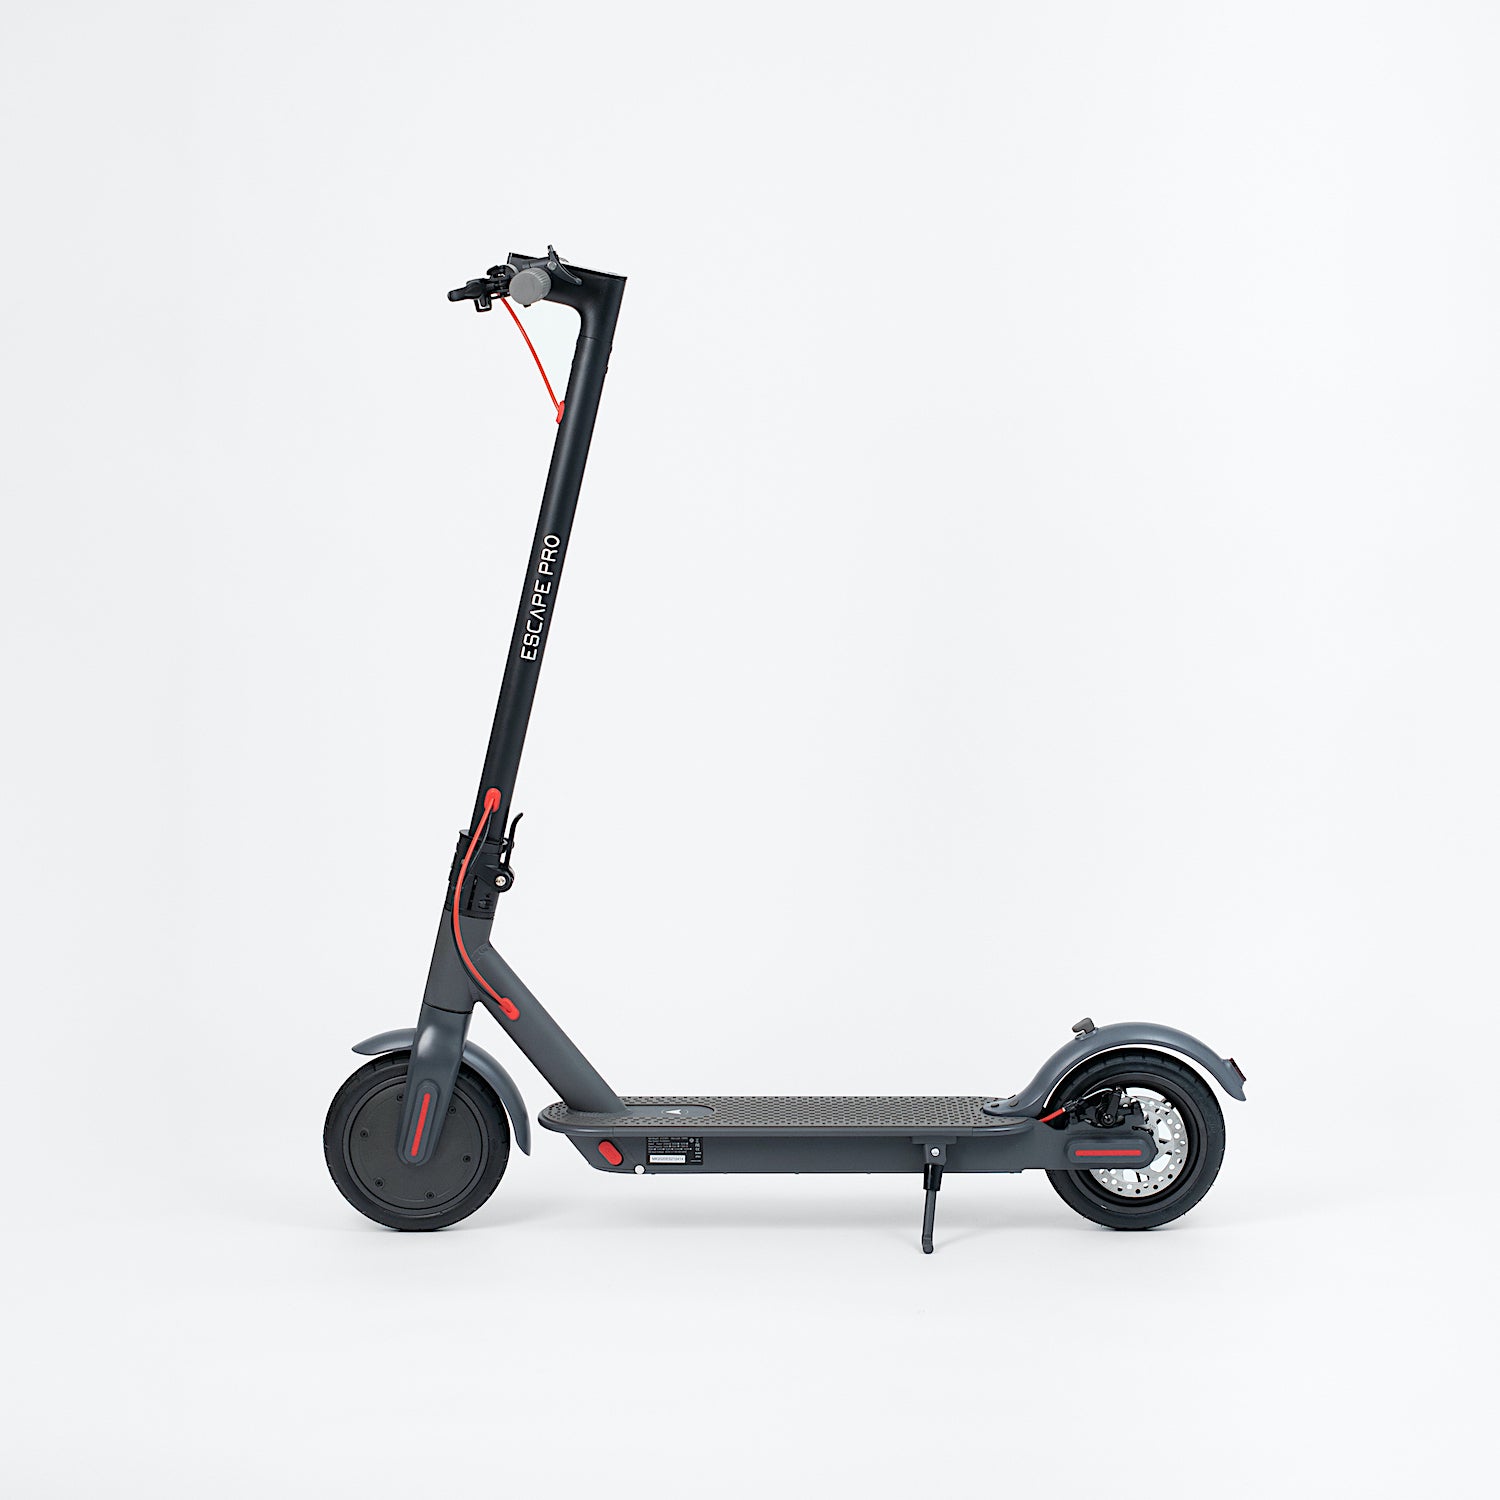 Escape Pro 2 Electric Scooter available at Ridezar.